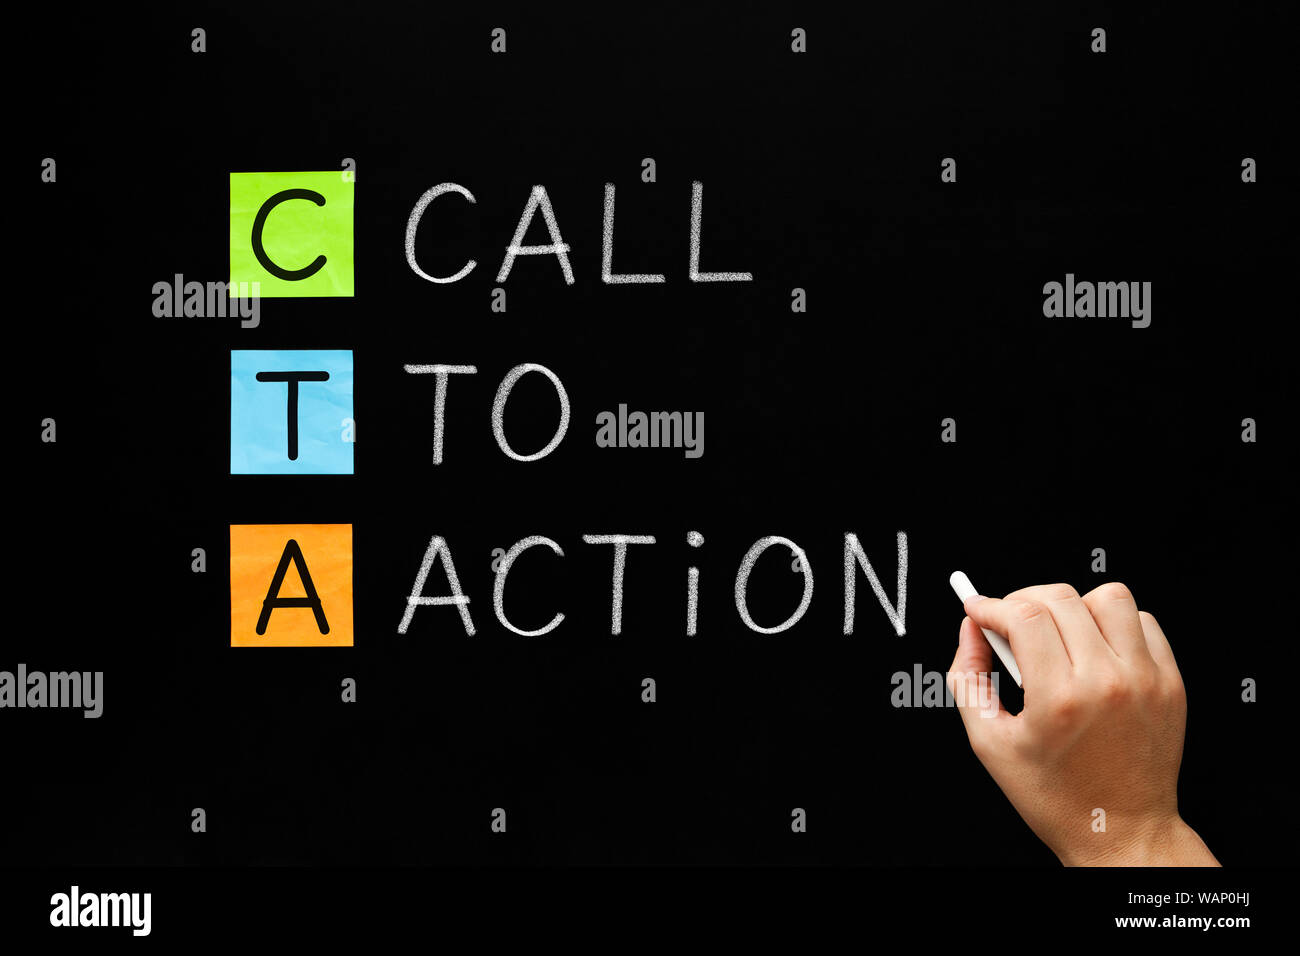 Hand writing business acronym CTA - Call To Action marketing concept with white chalk on blackboard. Stock Photo